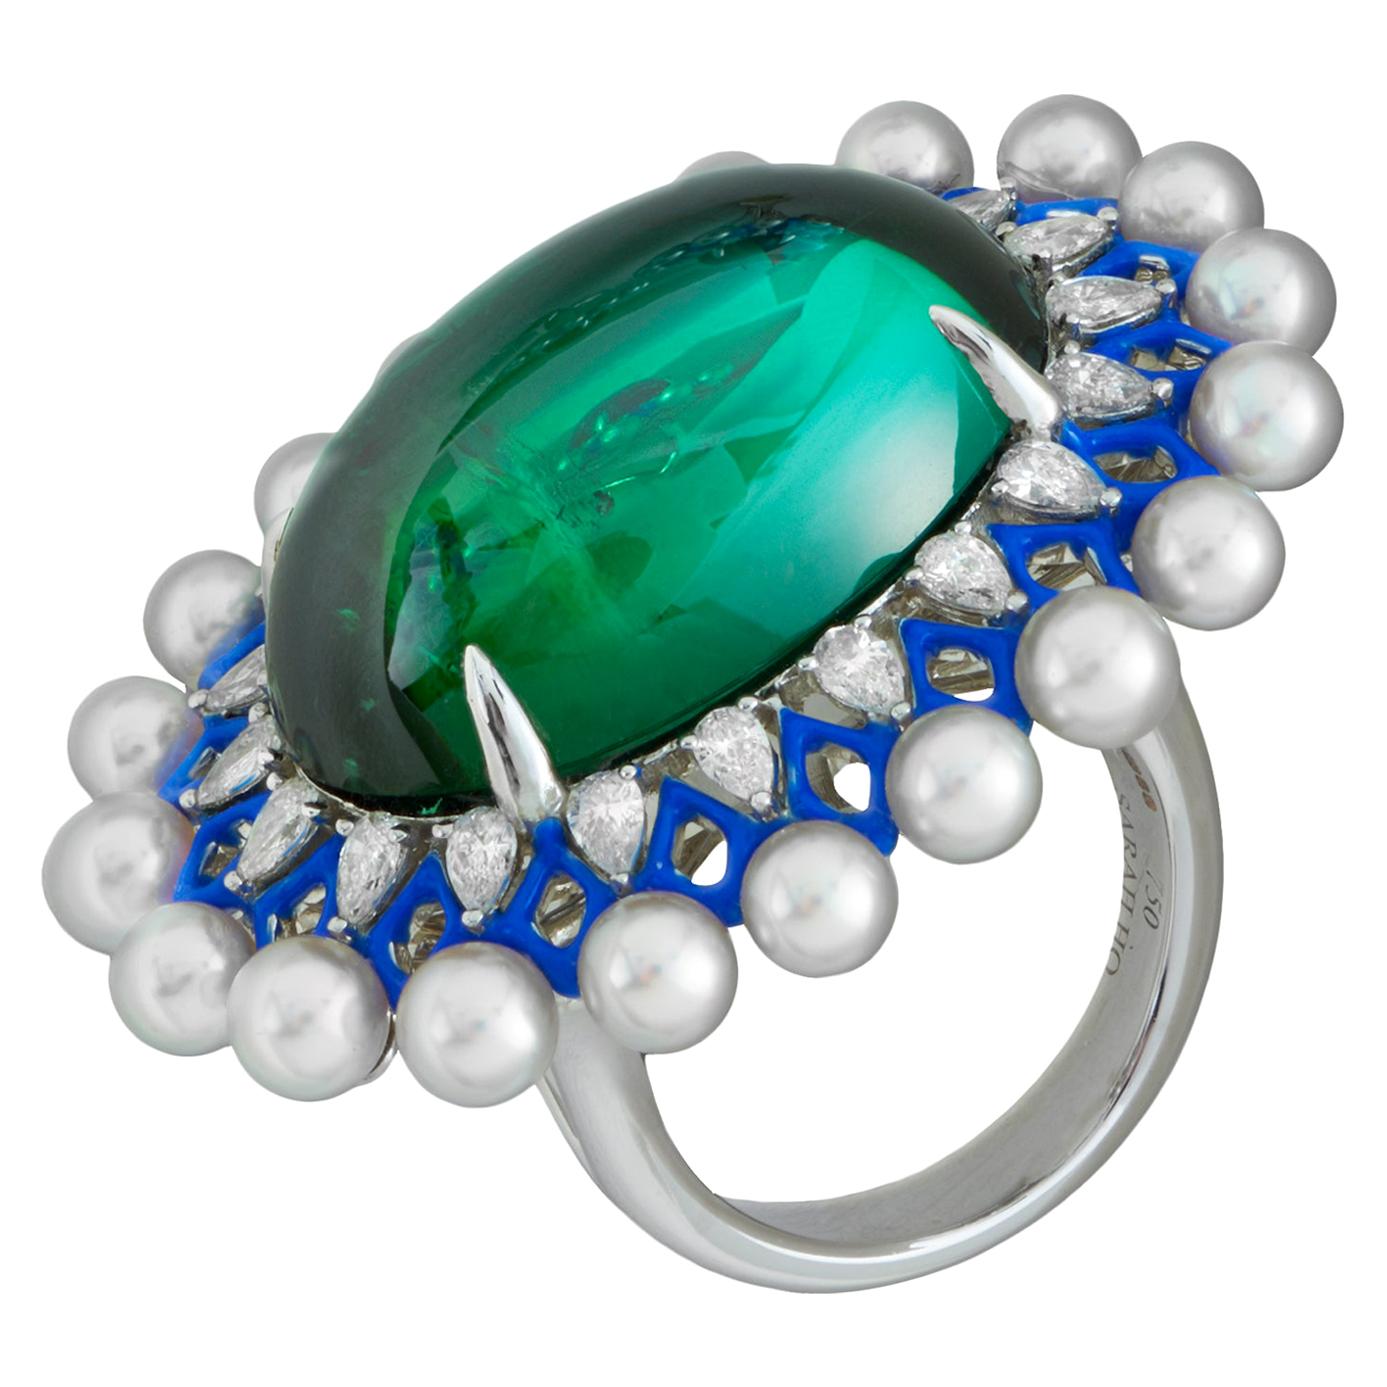 Green Tourmaline Cabachon and Akoya Pearls with Diamonds and Enamel Ring For Sale